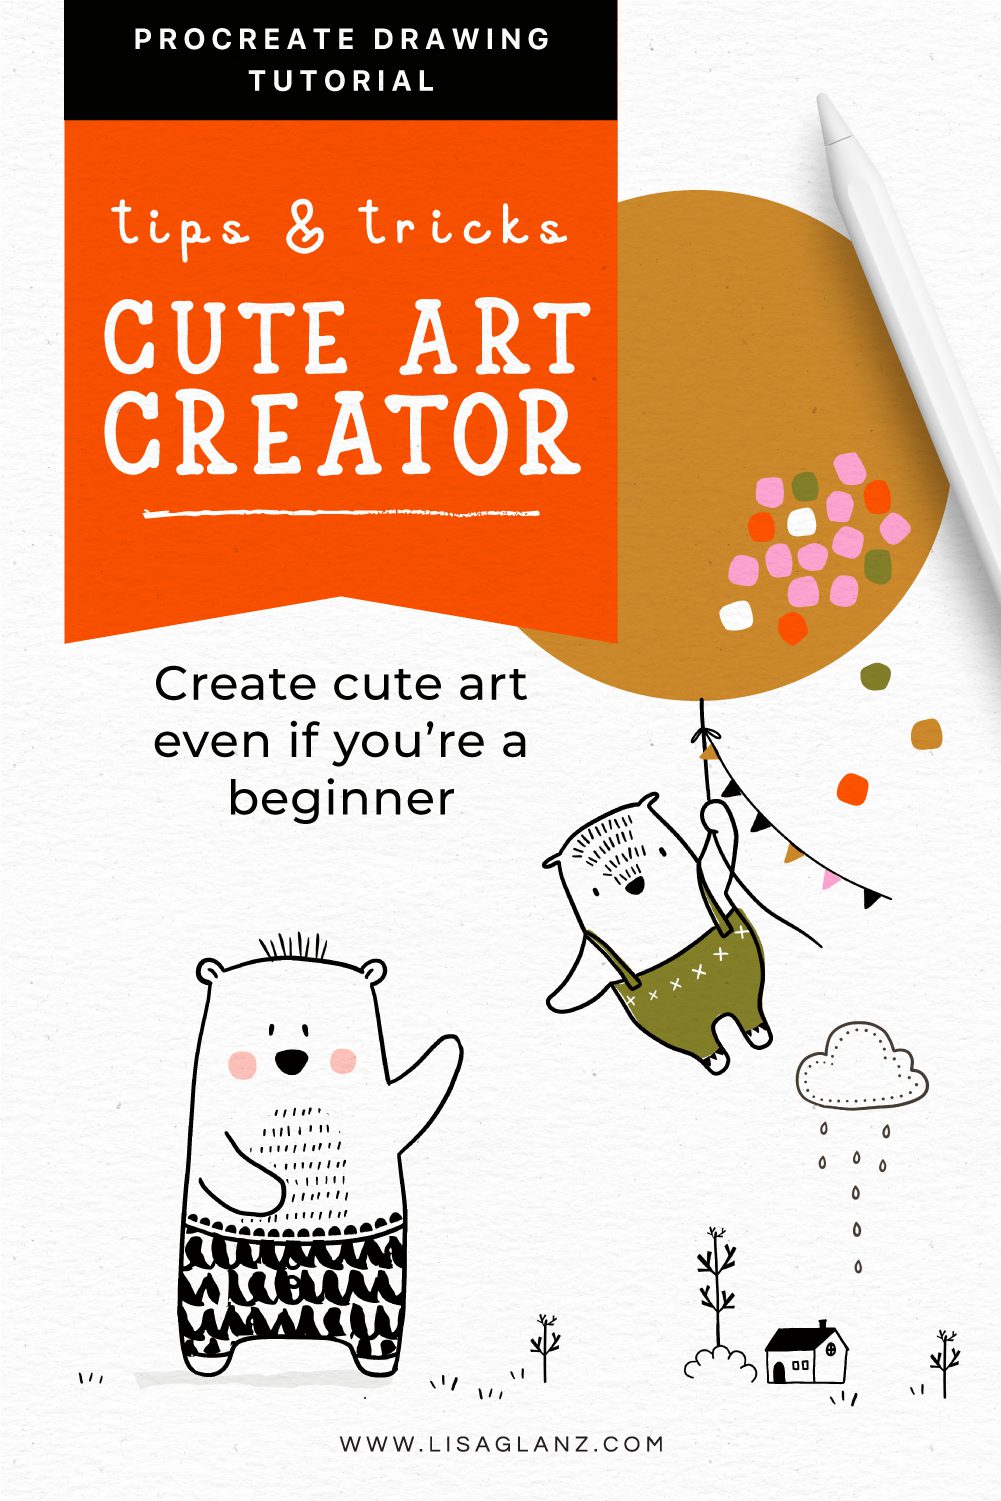 How to make fabulous cute art even if you’re a beginner!